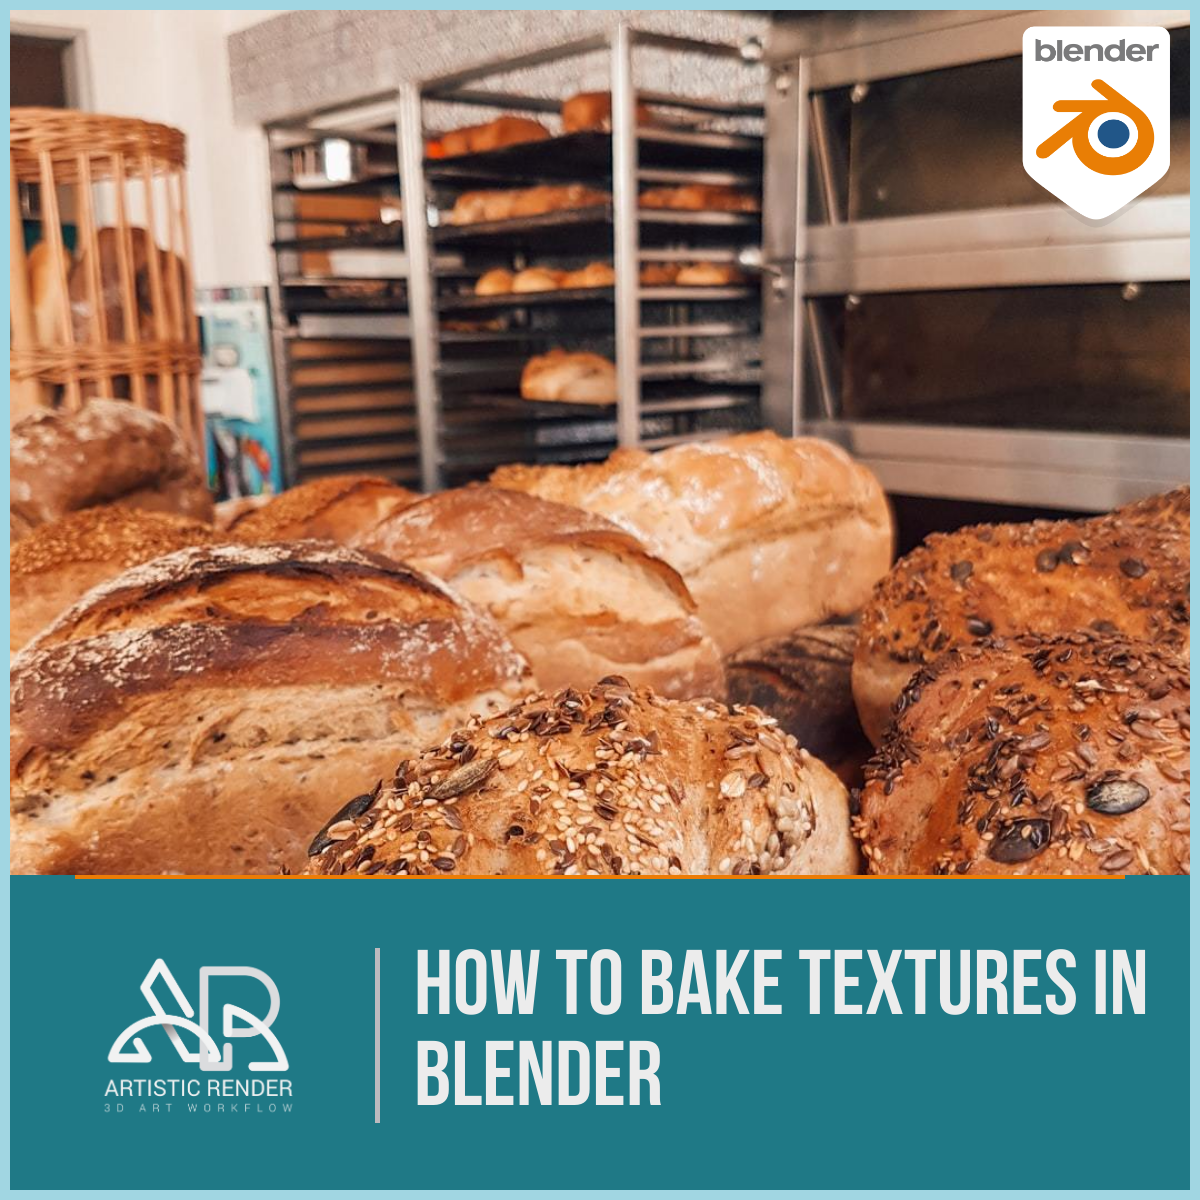 https://artisticrender.com/wp-content/uploads/2021/01/how-to-bake-textures-in-blender-1200x1200-feature.png